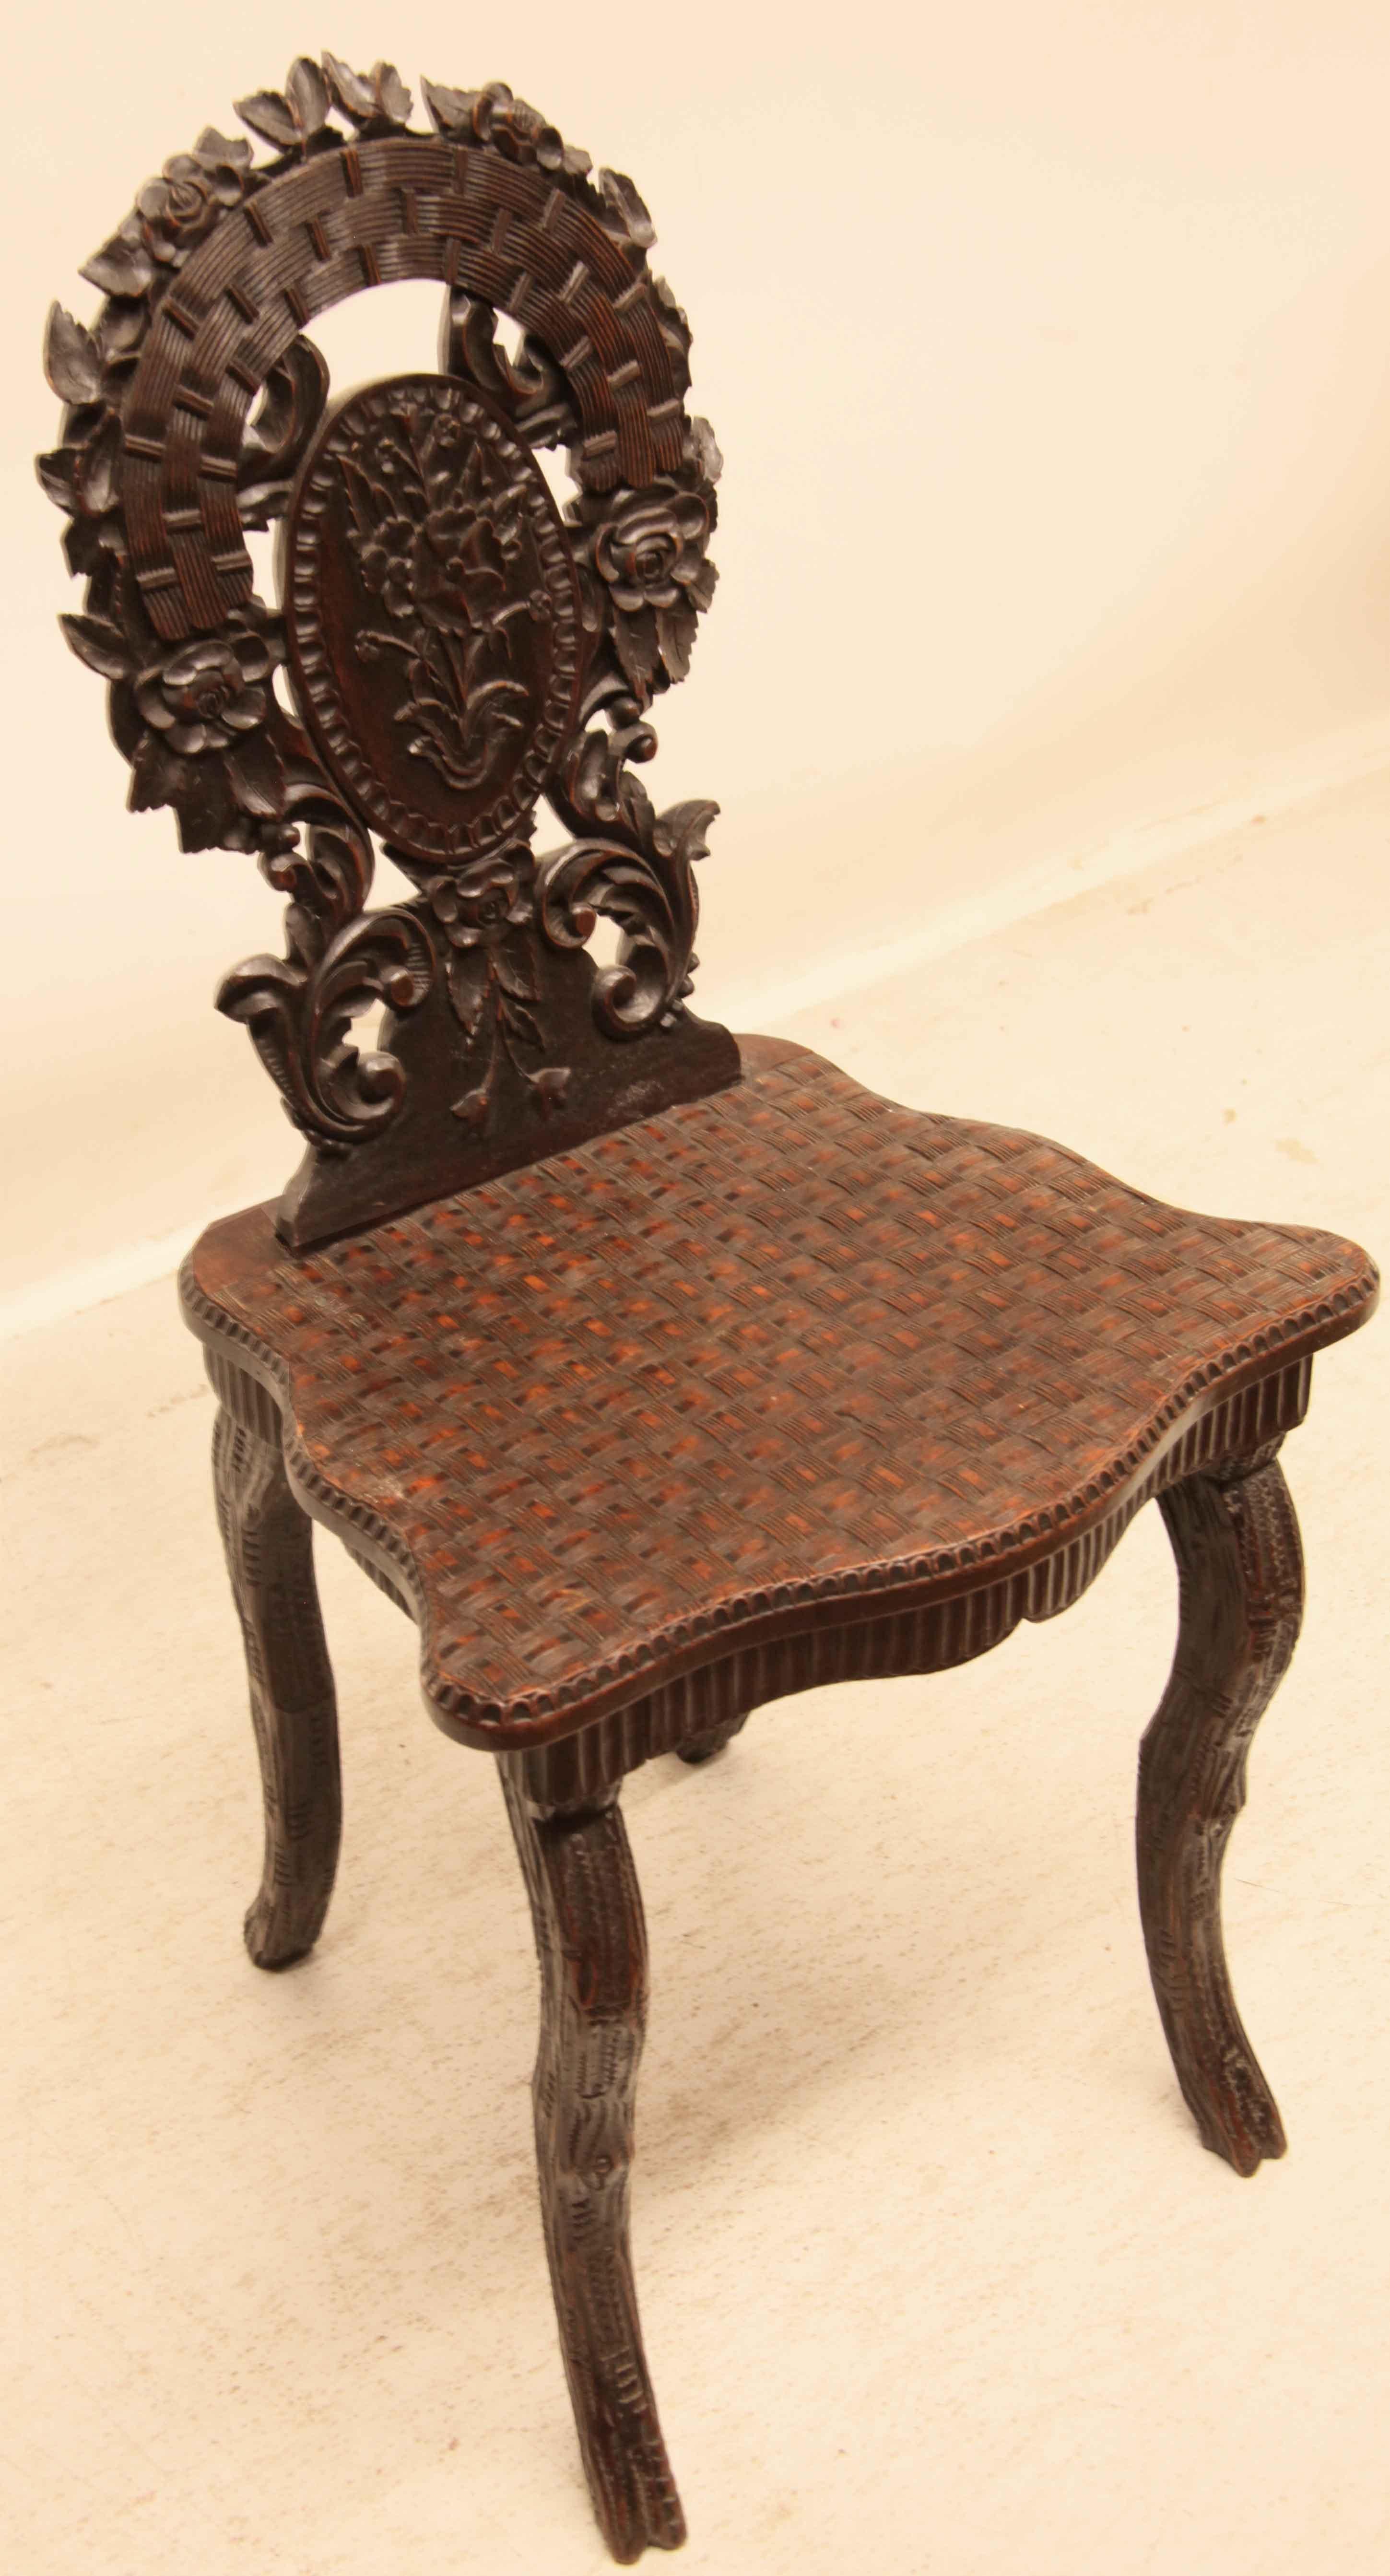 Black Forest side chair,  the back featuring carved flowers, foliage and central oval medallion. The seat has serpentine shaped sides and front with a carved basket weave design;  below this is a reeded apron .  The front and back legs have a